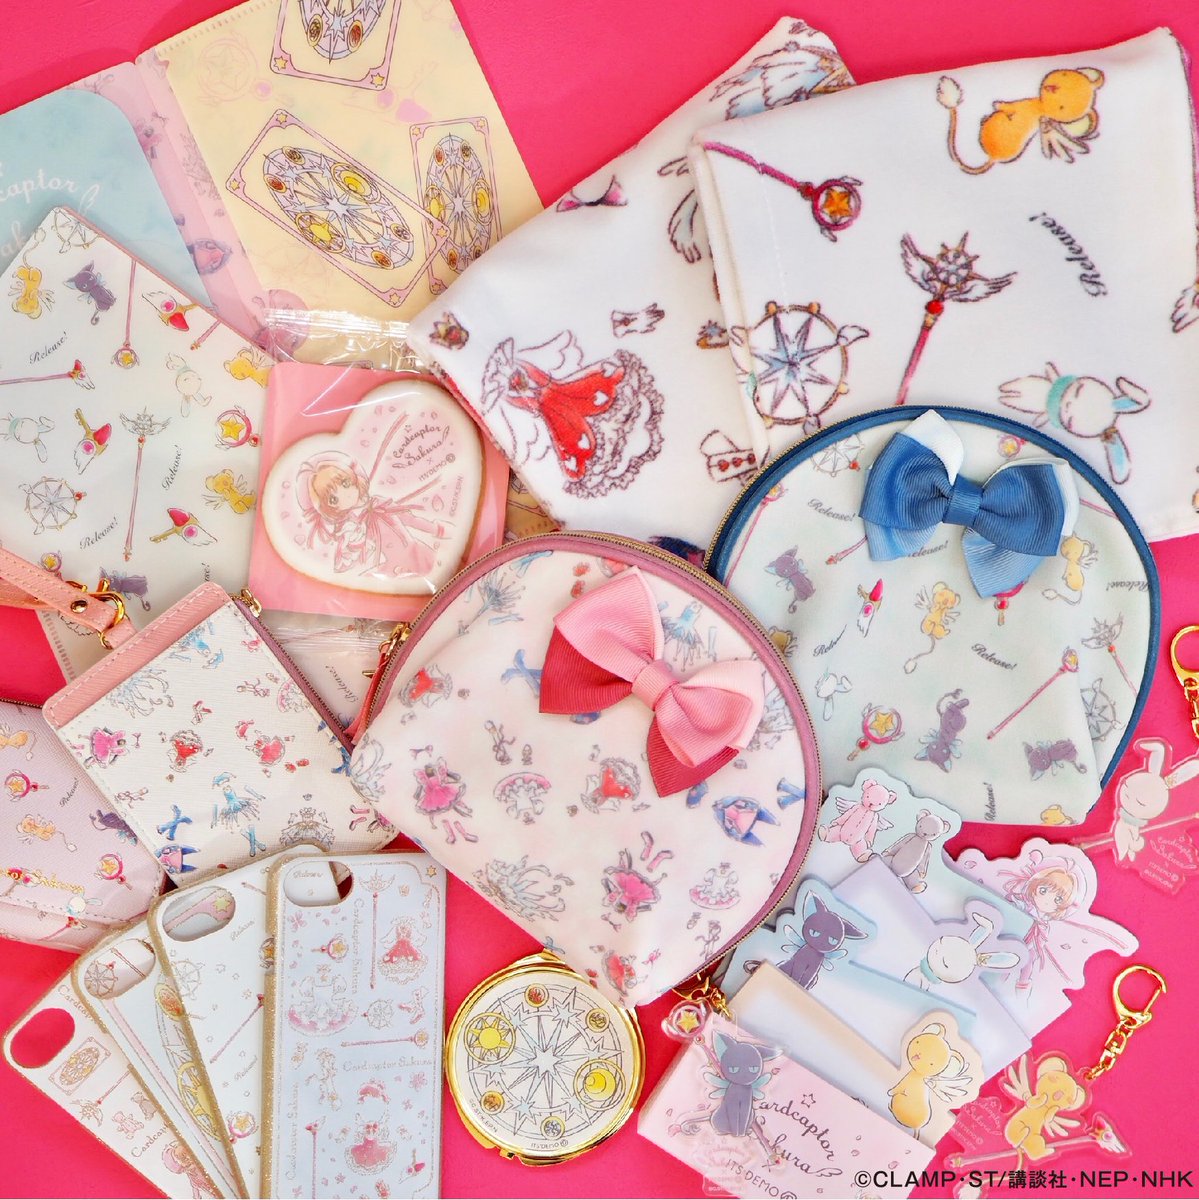 Aitai Kuji Japanese Cosmetics And Fashion Brand Its Demo Will Be Having A Cardcaptorsakura Collaboration Featuring A Myriad Of Accessories And Stationery With New Art Of Sakura Her Costumes Kero And Suppi